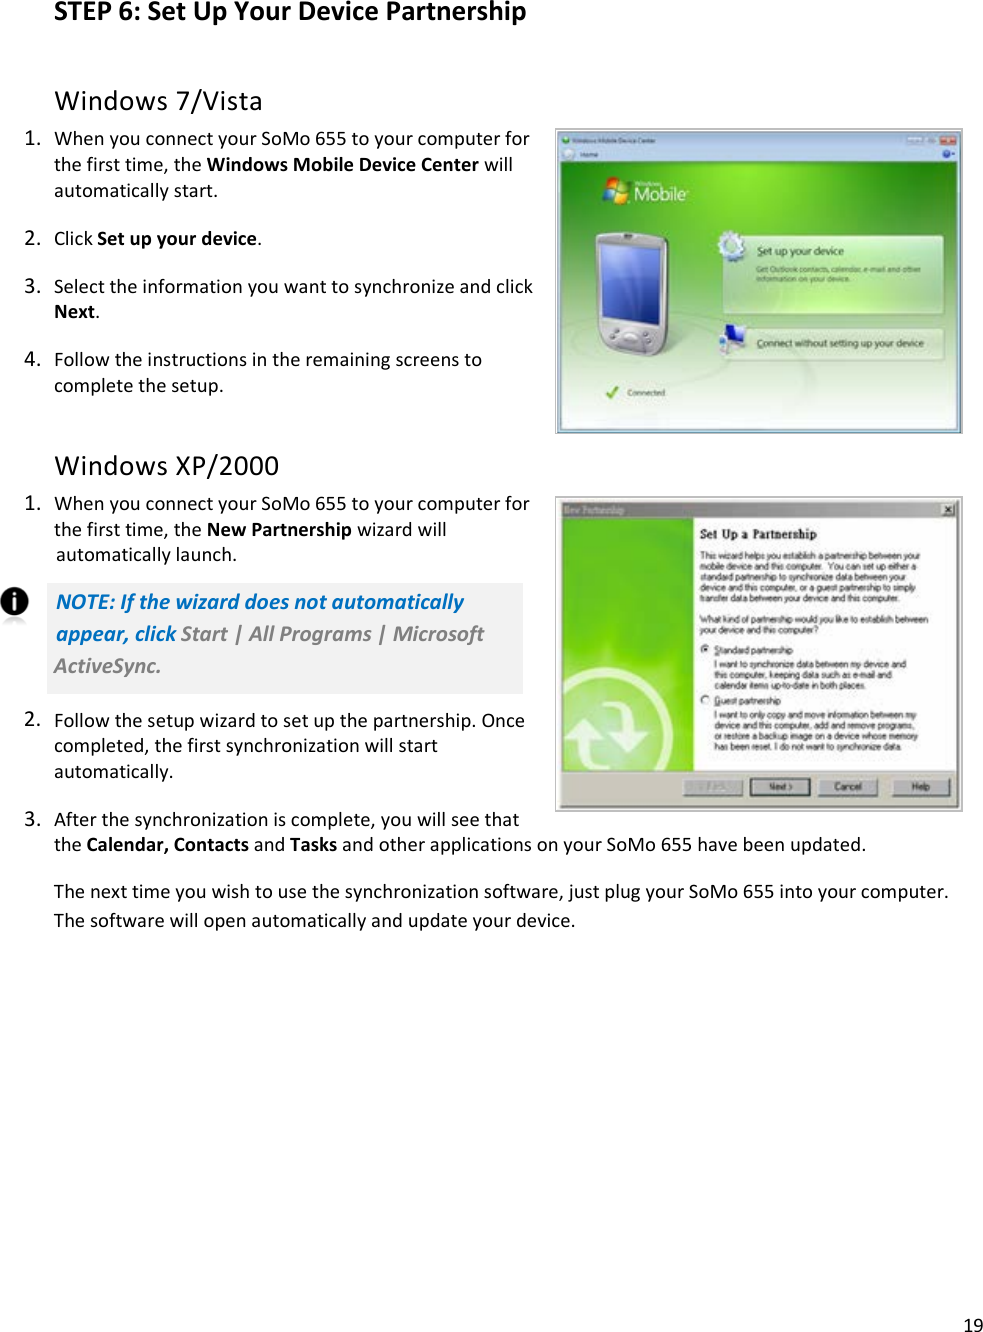 19   STEP 6: Set Up Your Device Partnership Windows 7/Vista 1. When you connect your SoMo 655 to your computer for the first time, the Windows Mobile Device Center will automatically start. 2. Click Set up your device. 3. Select the information you want to synchronize and click Next. 4. Follow the instructions in the remaining screens to complete the setup. Windows XP/2000 1. When you connect your SoMo 655 to your computer for the first time, the New Partnership wizard will automatically launch. NOTE: If the wizard does not automatically appear, click Start | All Programs | Microsoft ActiveSync. 2. Follow the setup wizard to set up the partnership. Once completed, the first synchronization will start automatically. 3. After the synchronization is complete, you will see that the Calendar, Contacts and Tasks and other applications on your SoMo 655 have been updated. The next time you wish to use the synchronization software, just plug your SoMo 655 into your computer. The software will open automatically and update your device. 